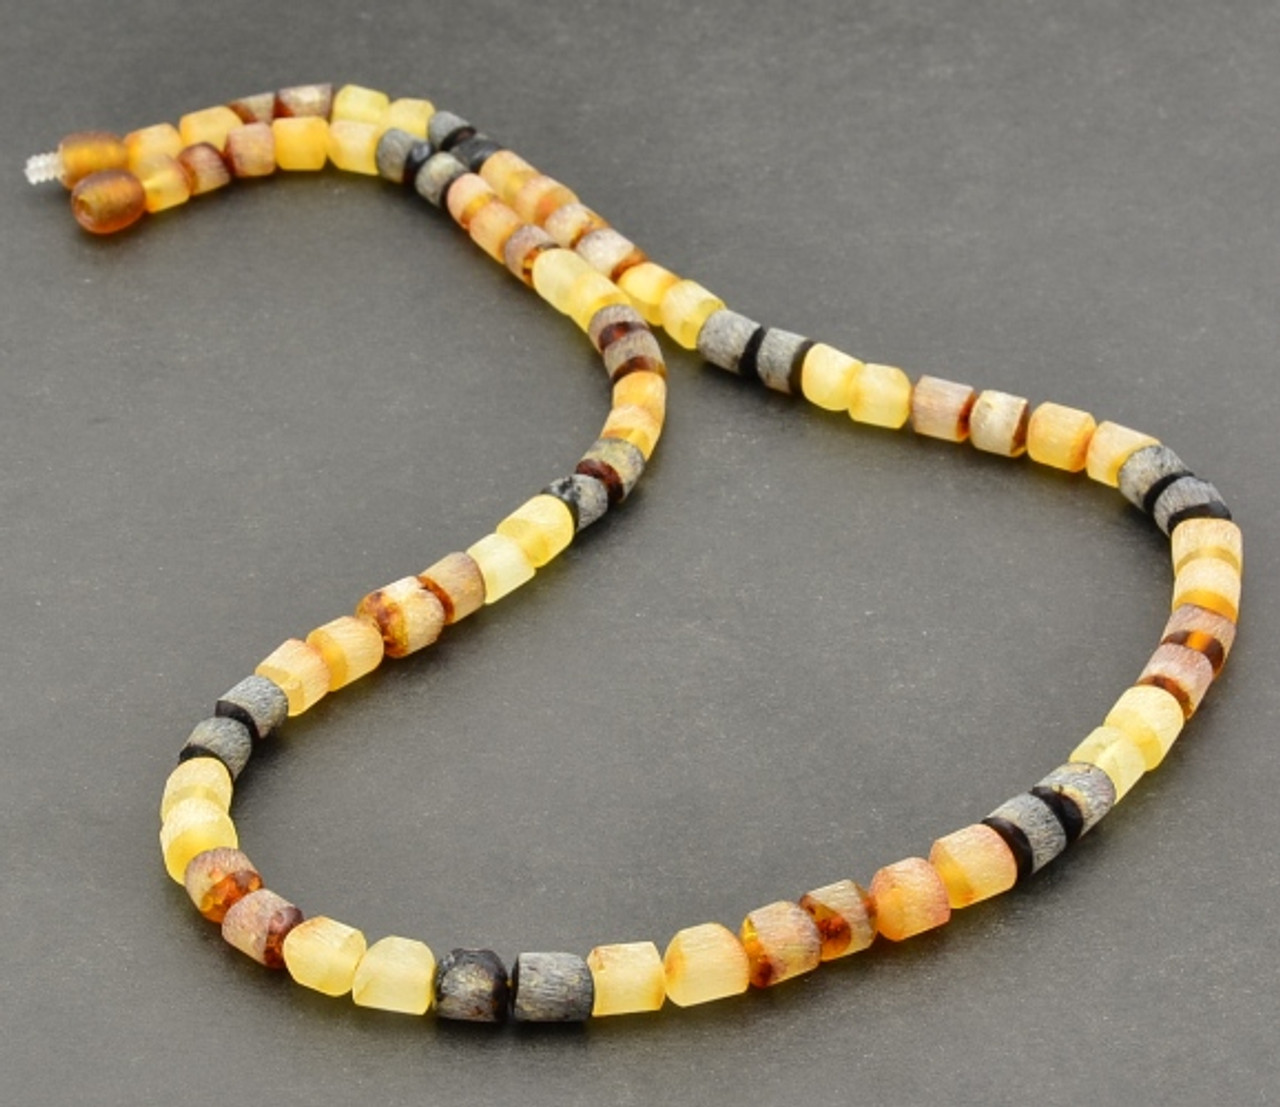 Masculine Men's Beaded Necklace Made of Precious Amber.